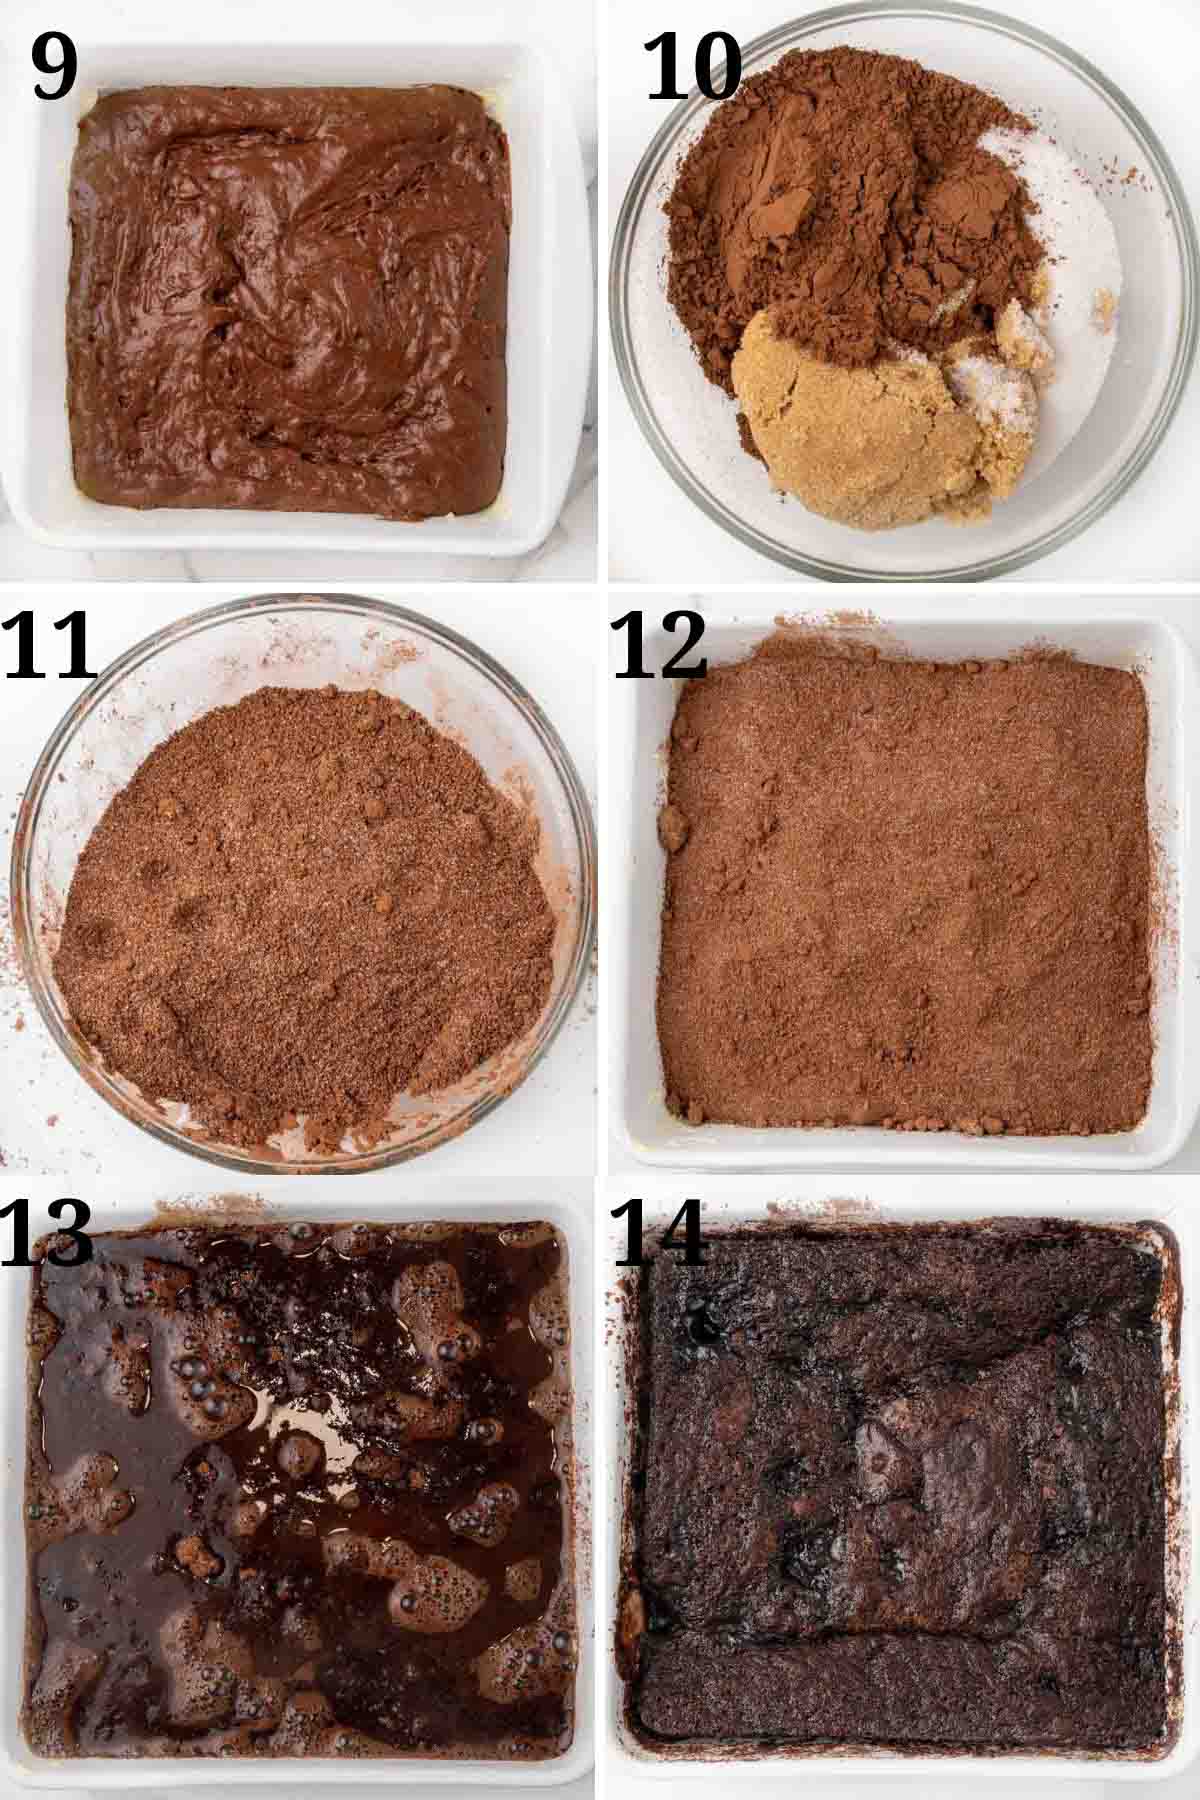 Collage showing final steps in recipe.